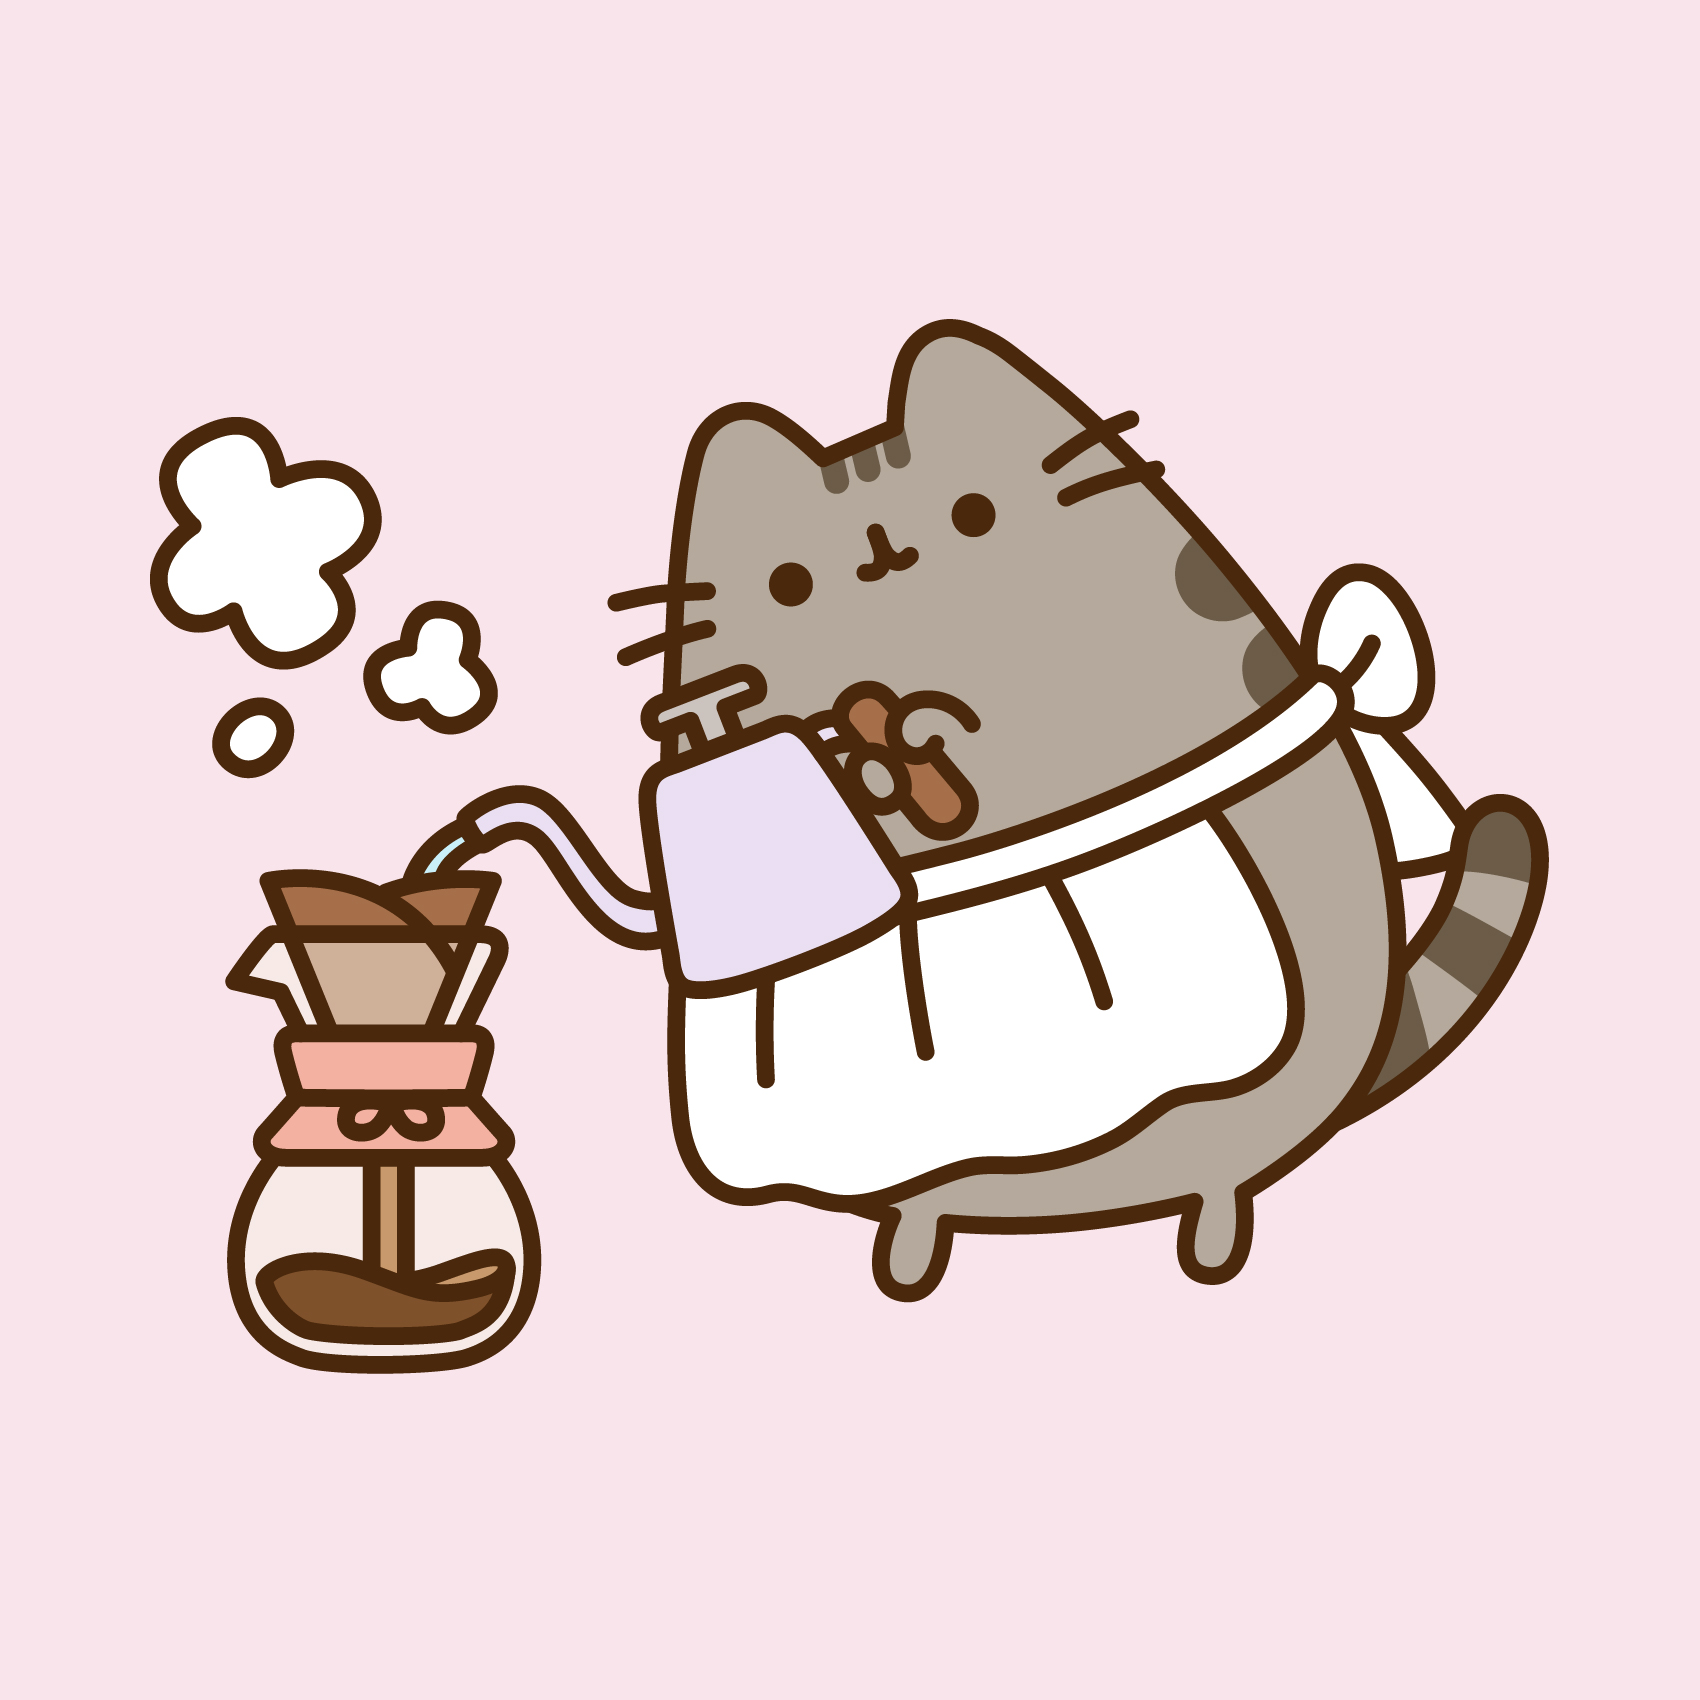 all about pusheen the cat